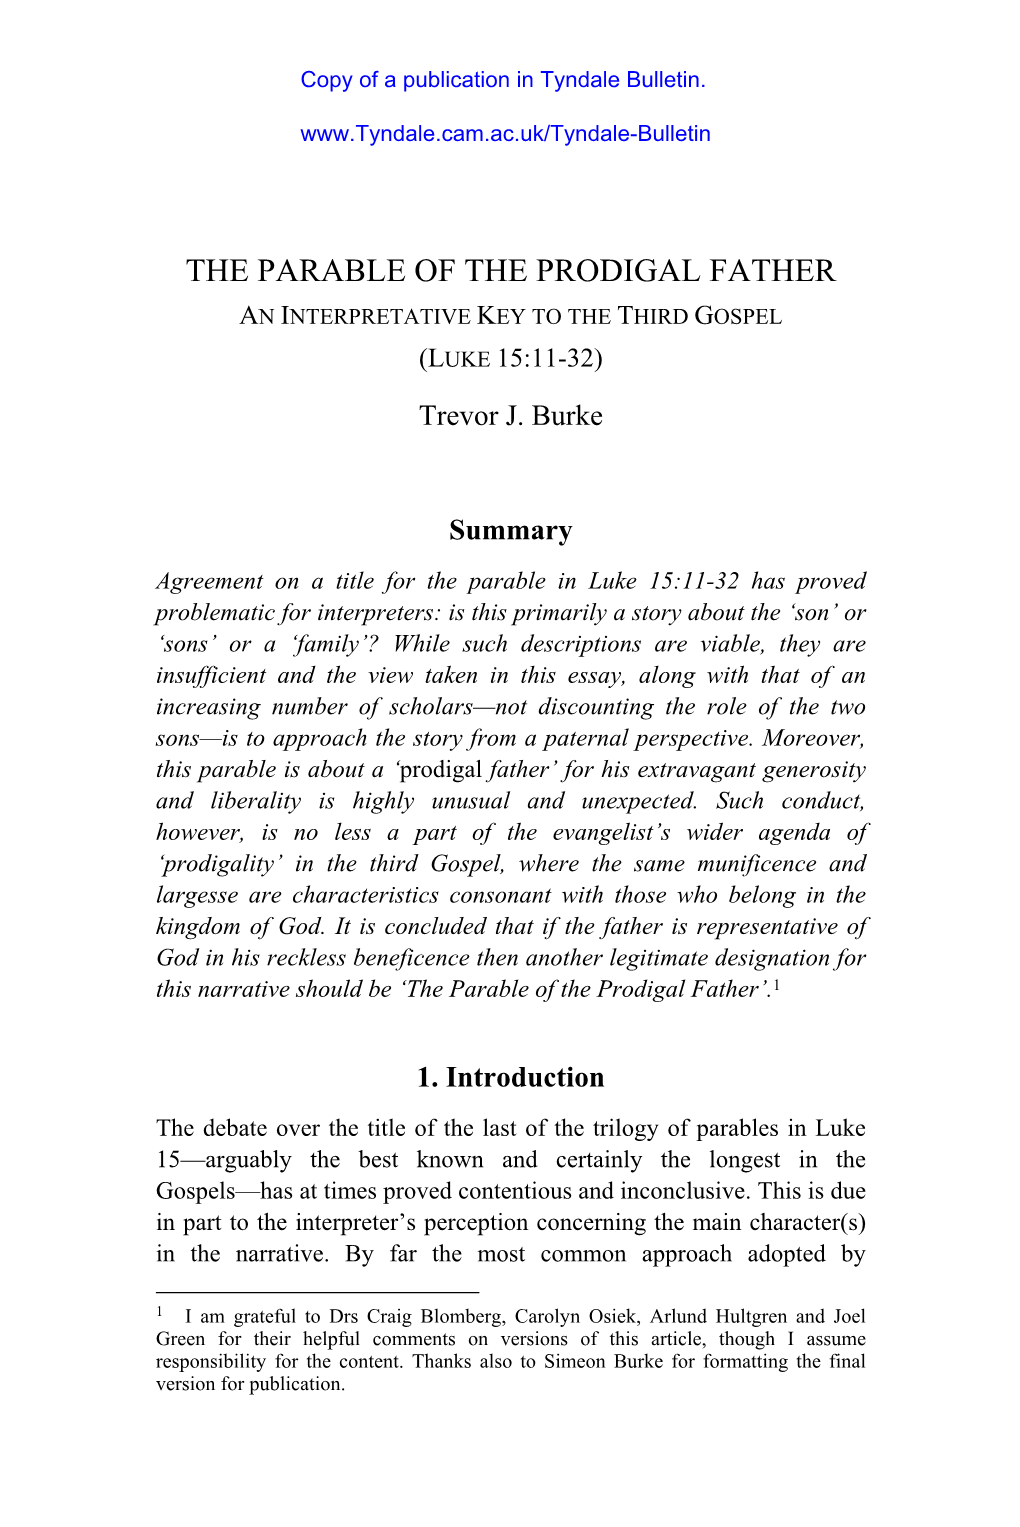 The Parable of the Prodigal Father: an Interpretative Key to the Third Gospel